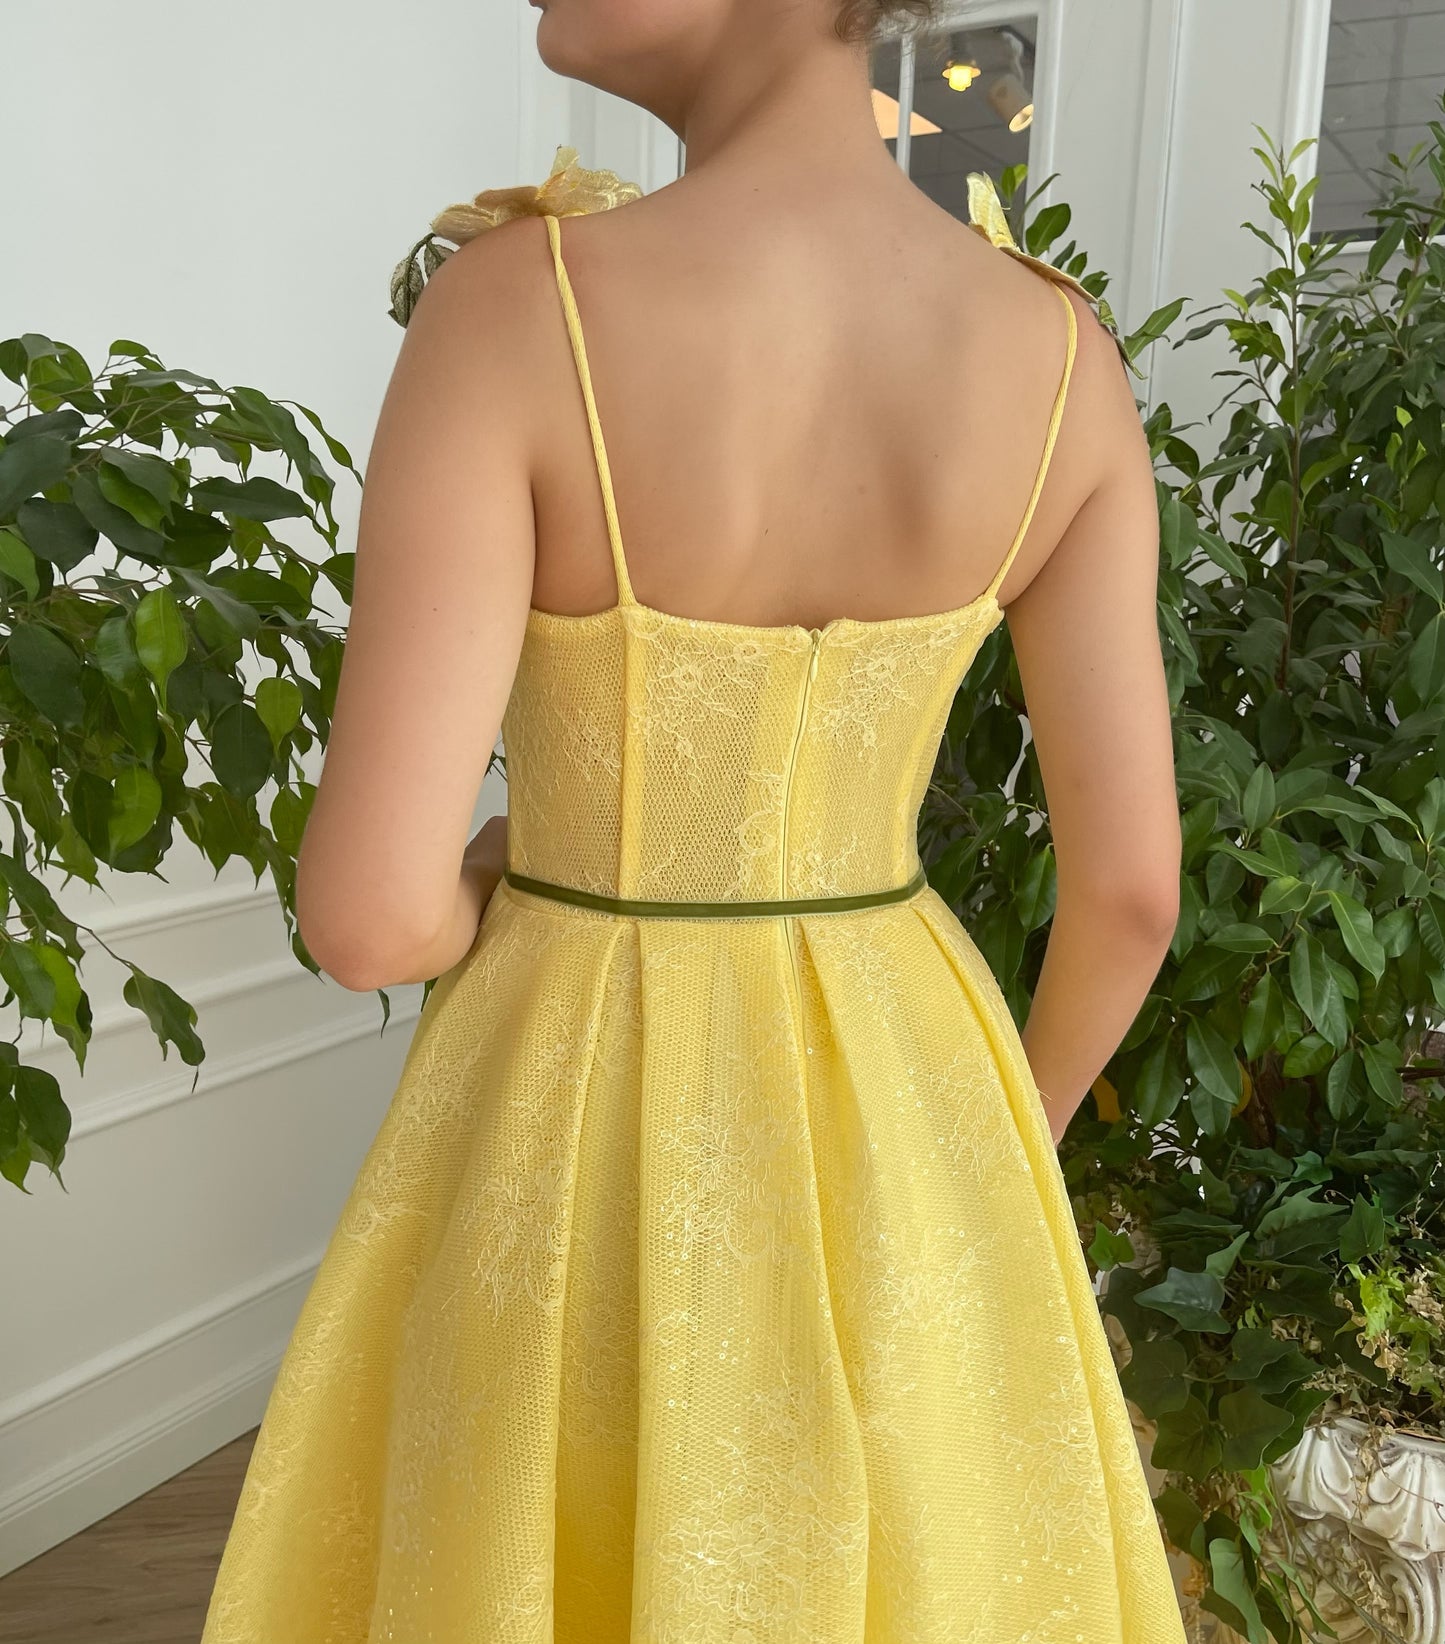 Yellow A-Line dress with embroidery and spaghetti straps